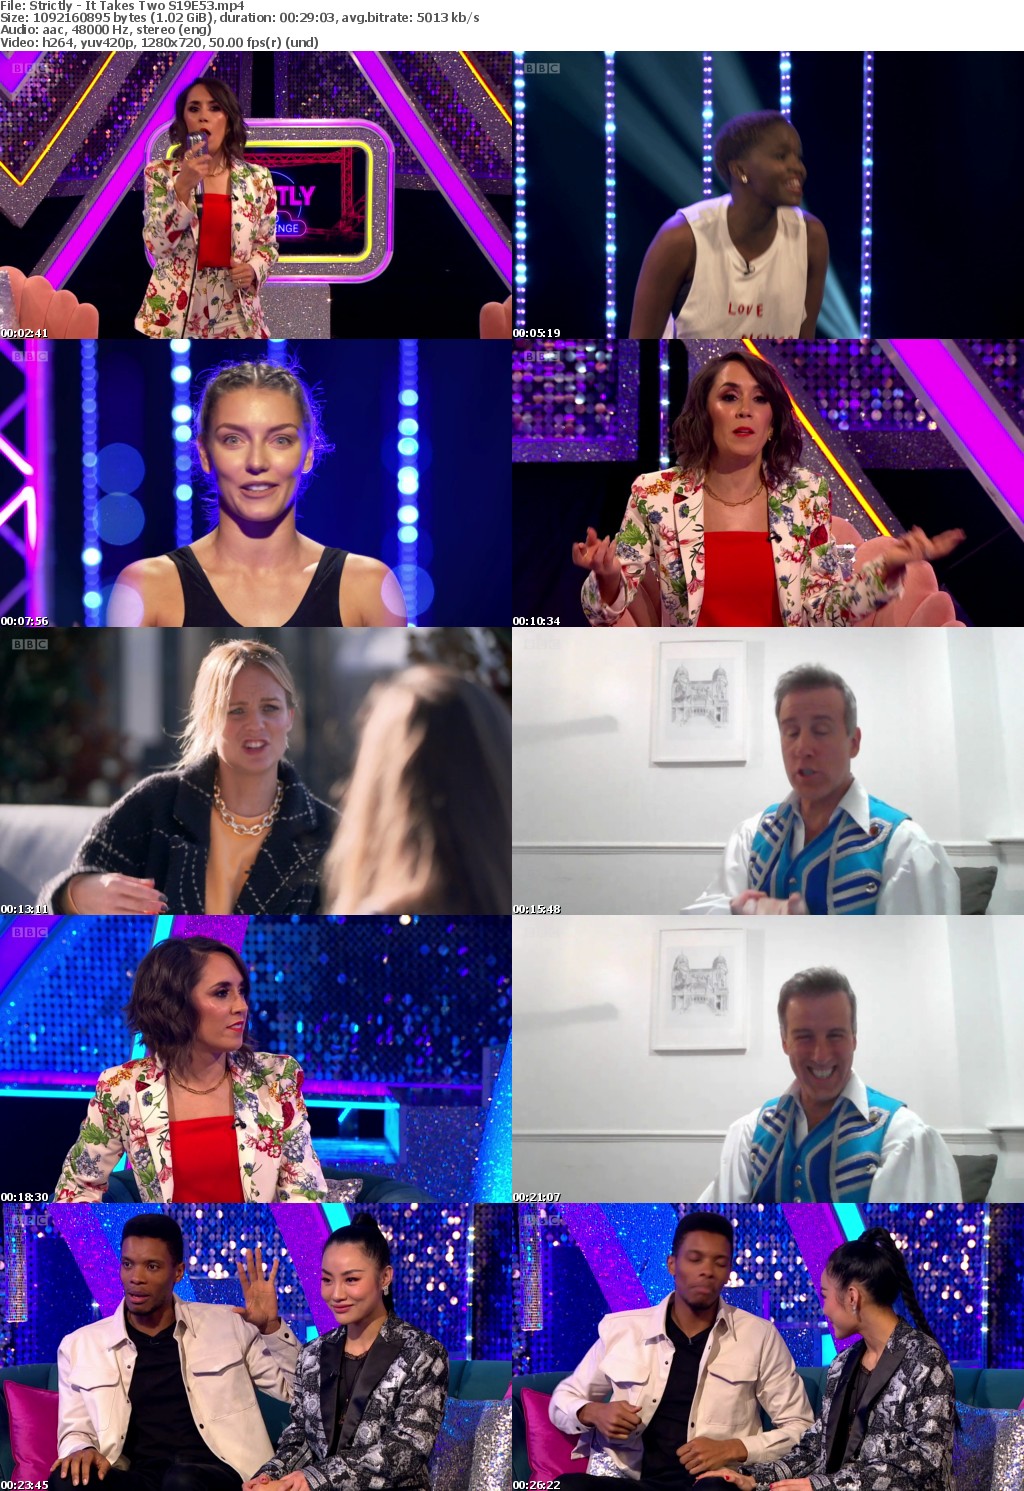 Strictly - It Takes Two S19E53 (1280x720p HD, 50fps, soft Eng subs)